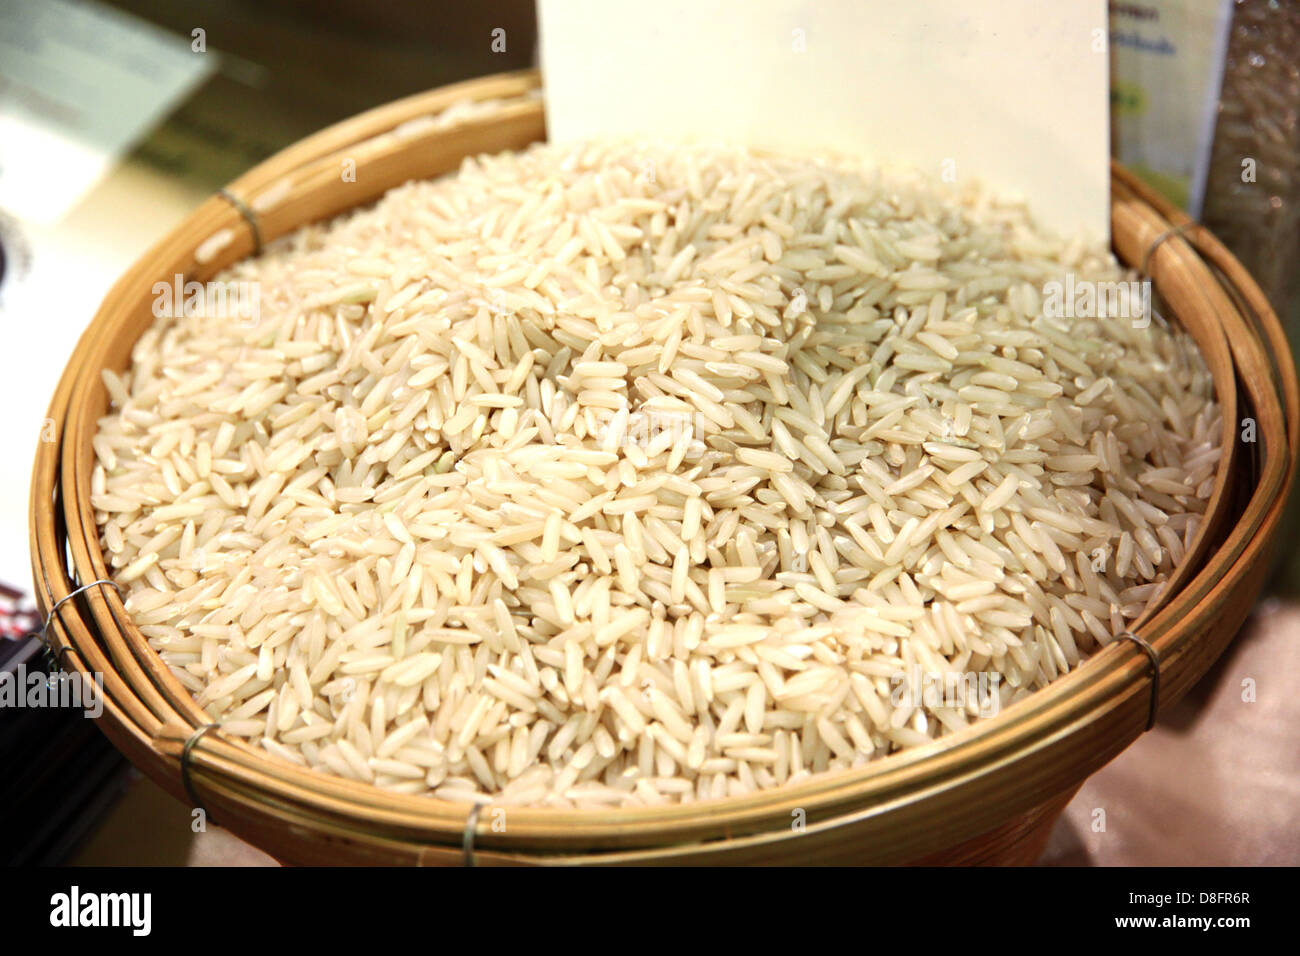 The Rice Grain in container.The rice is white color. Stock Photo